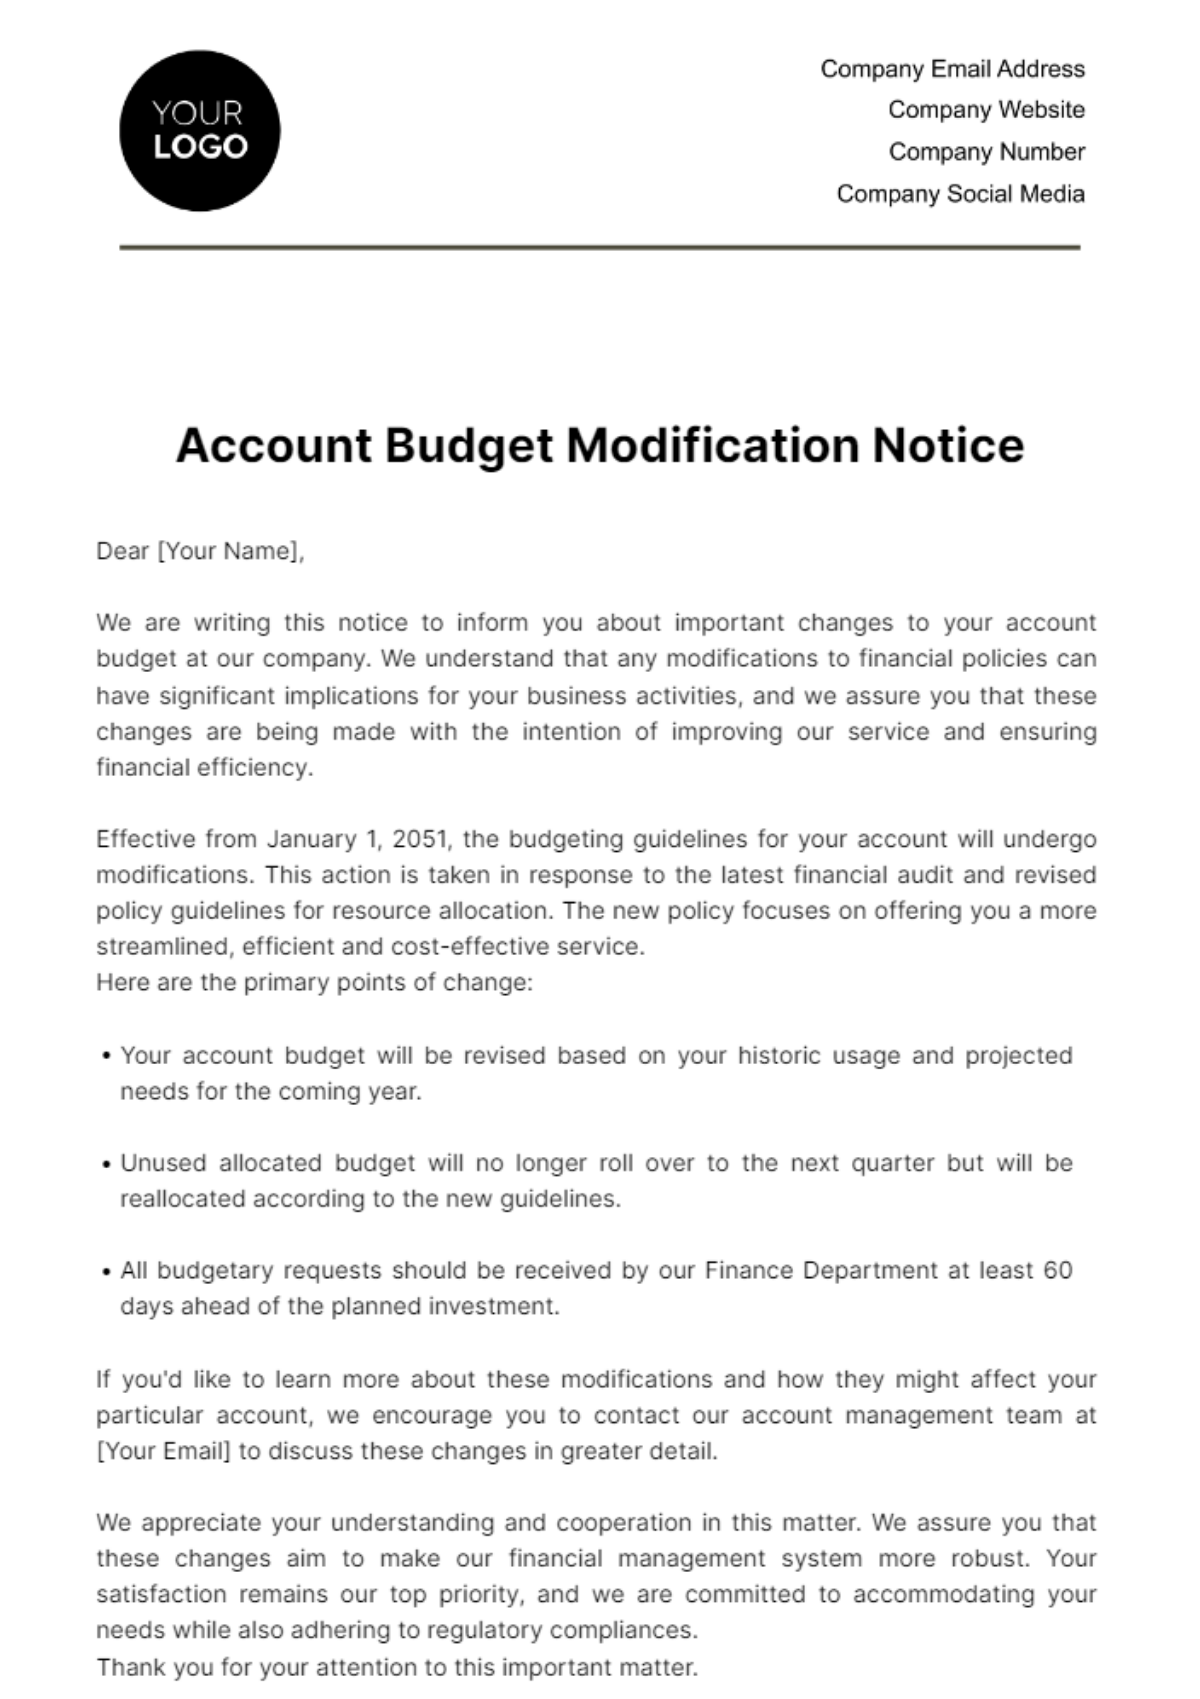 Account Budget Modification Notice Template